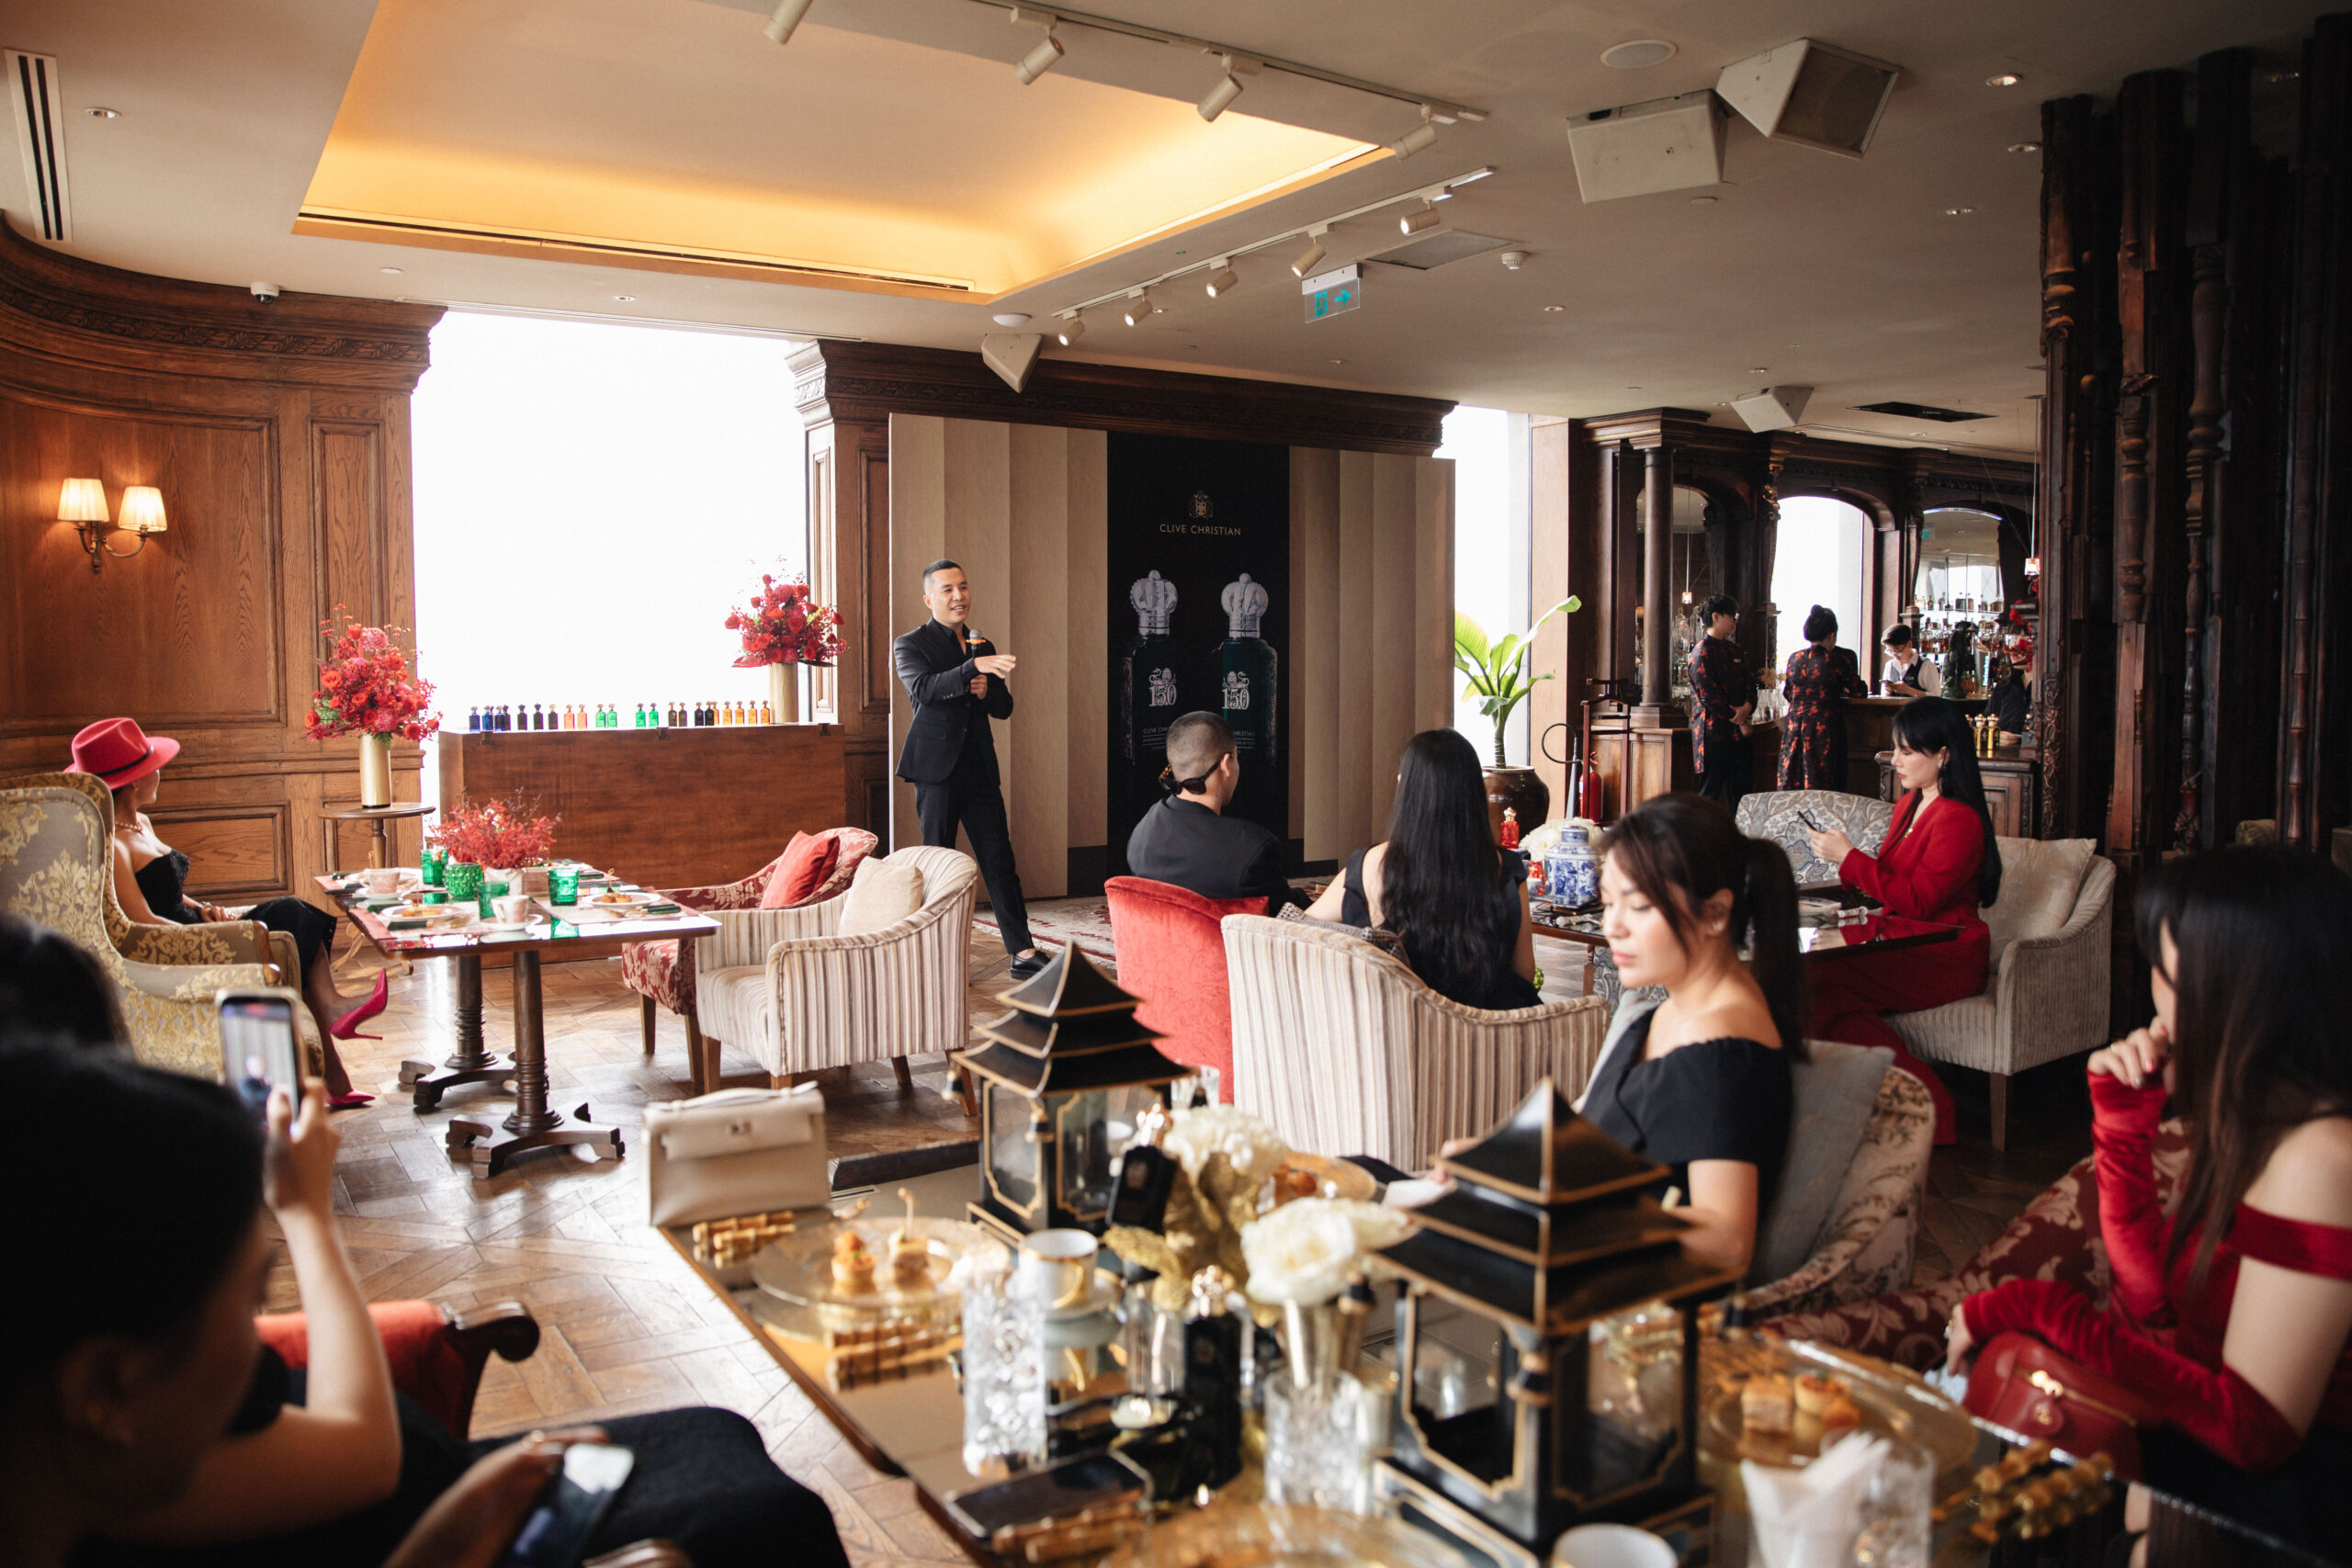 Perfumer Eric Tran shared in the event of the mecca of scents